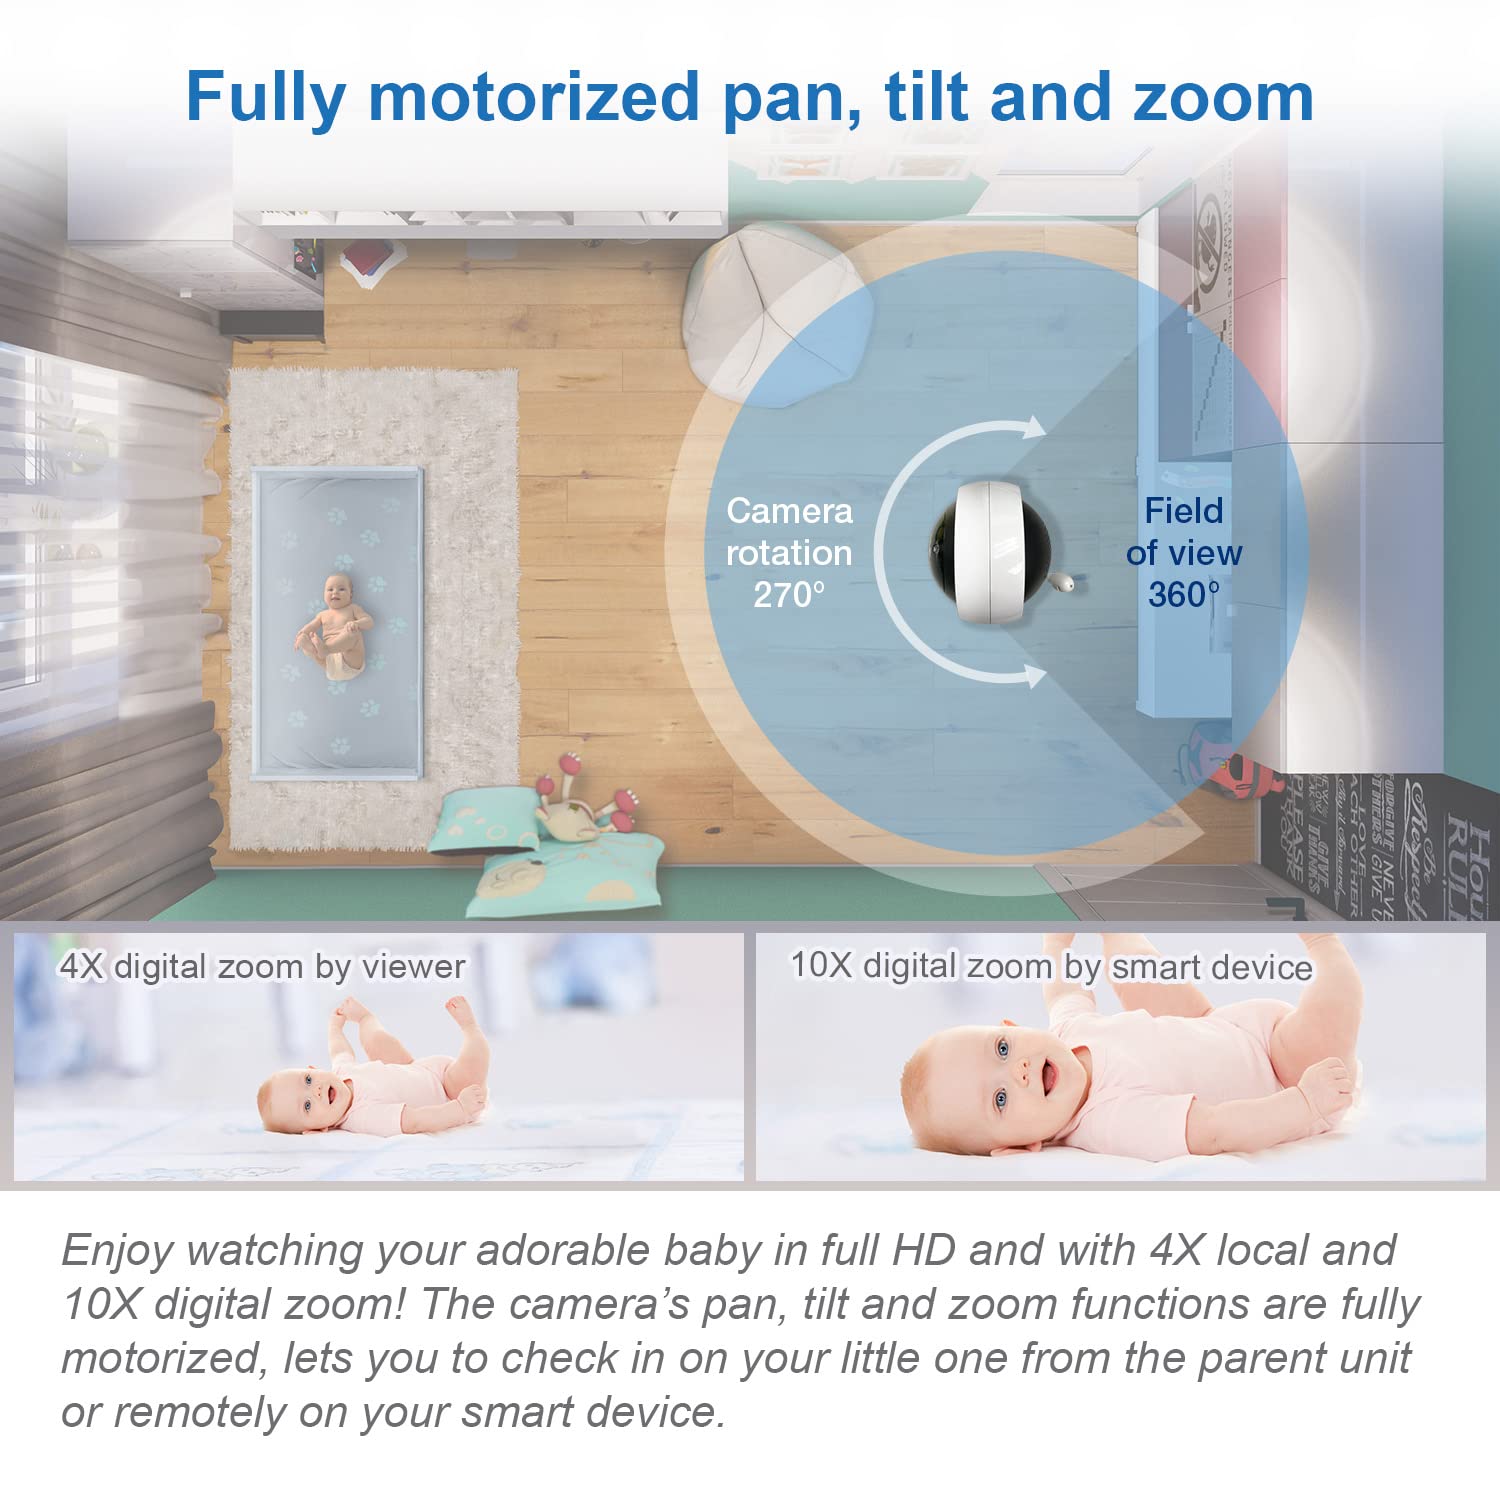 VTech RM7764-2HD 1080p Smart WiFi Remote Access 2Camera BabyMonitor, 360° Pan&Tilt, 10X Zoom, 7” 720p HD Display, HD NightVision, Soothing Sounds, 2-Way Talk, Temperature&Motion Detection, iOS&Android